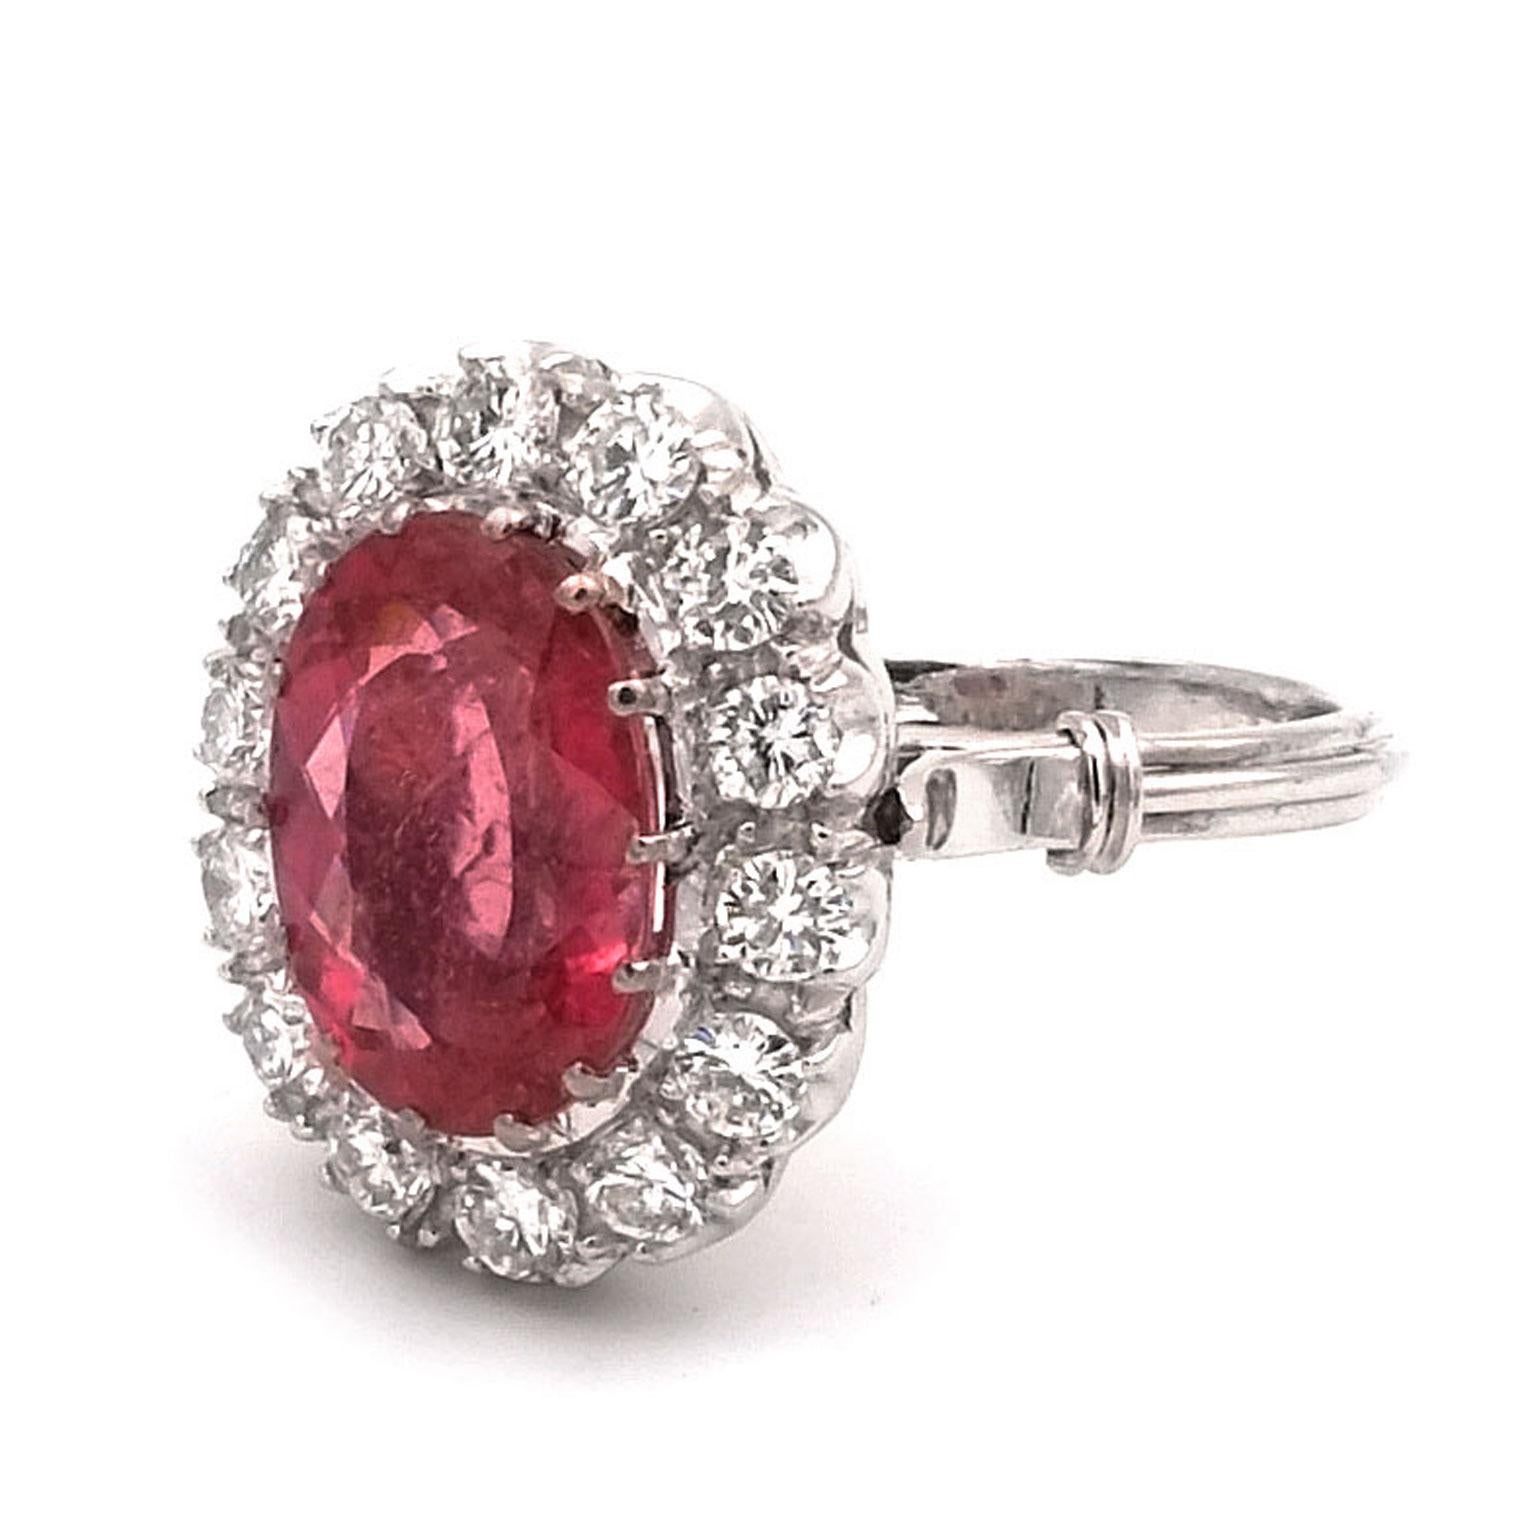 5.7 Carat Rubelite and 1.4 Carat Diamond White Gold Cluster Ring In Good Condition For Sale In Goettingen, DE